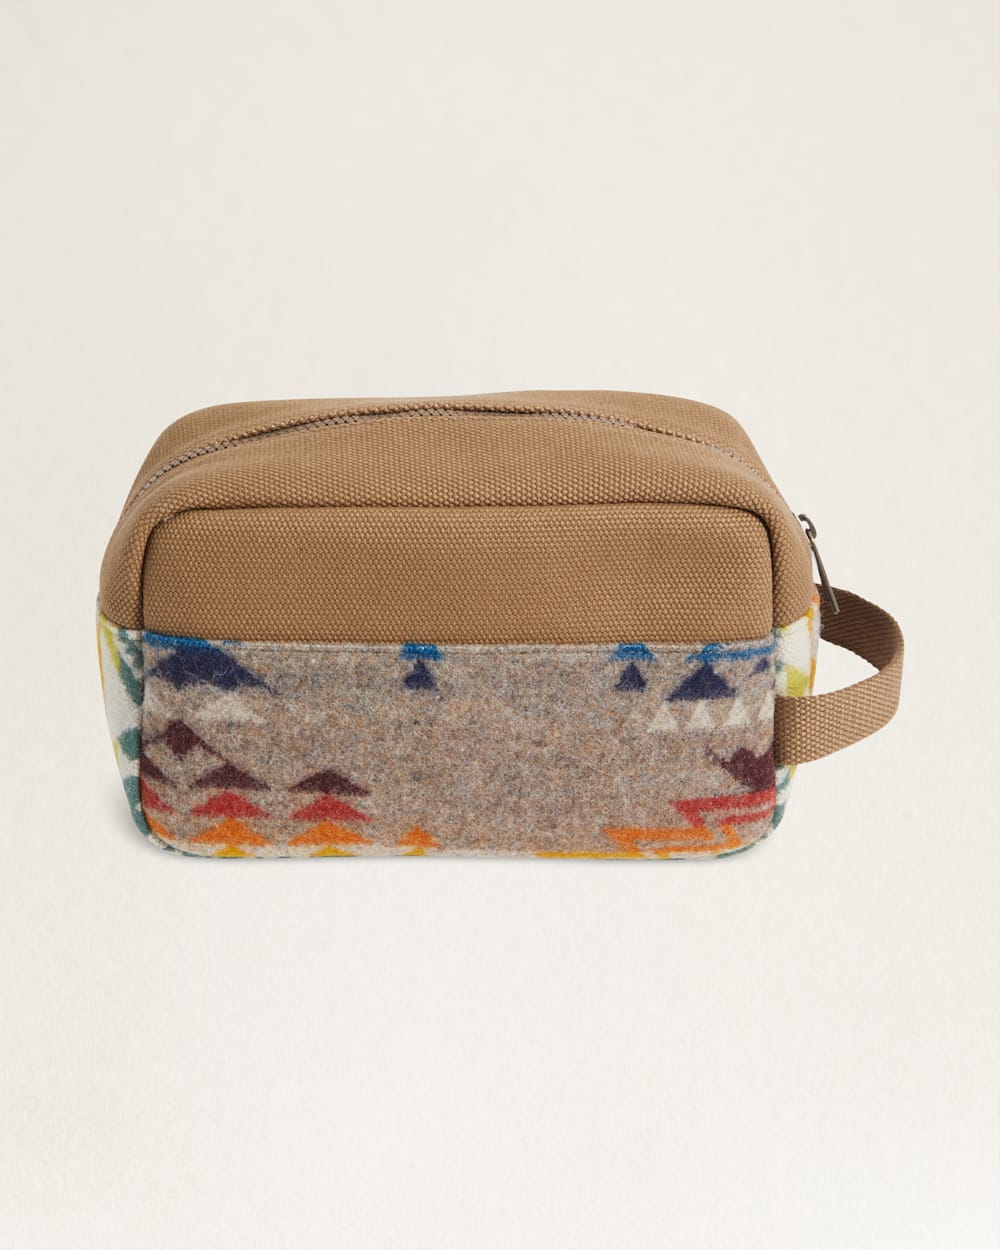 ALTERNATE VIEW OF HIGHLAND PEAK CARRYALL POUCH IN TAN MULTI image number 2